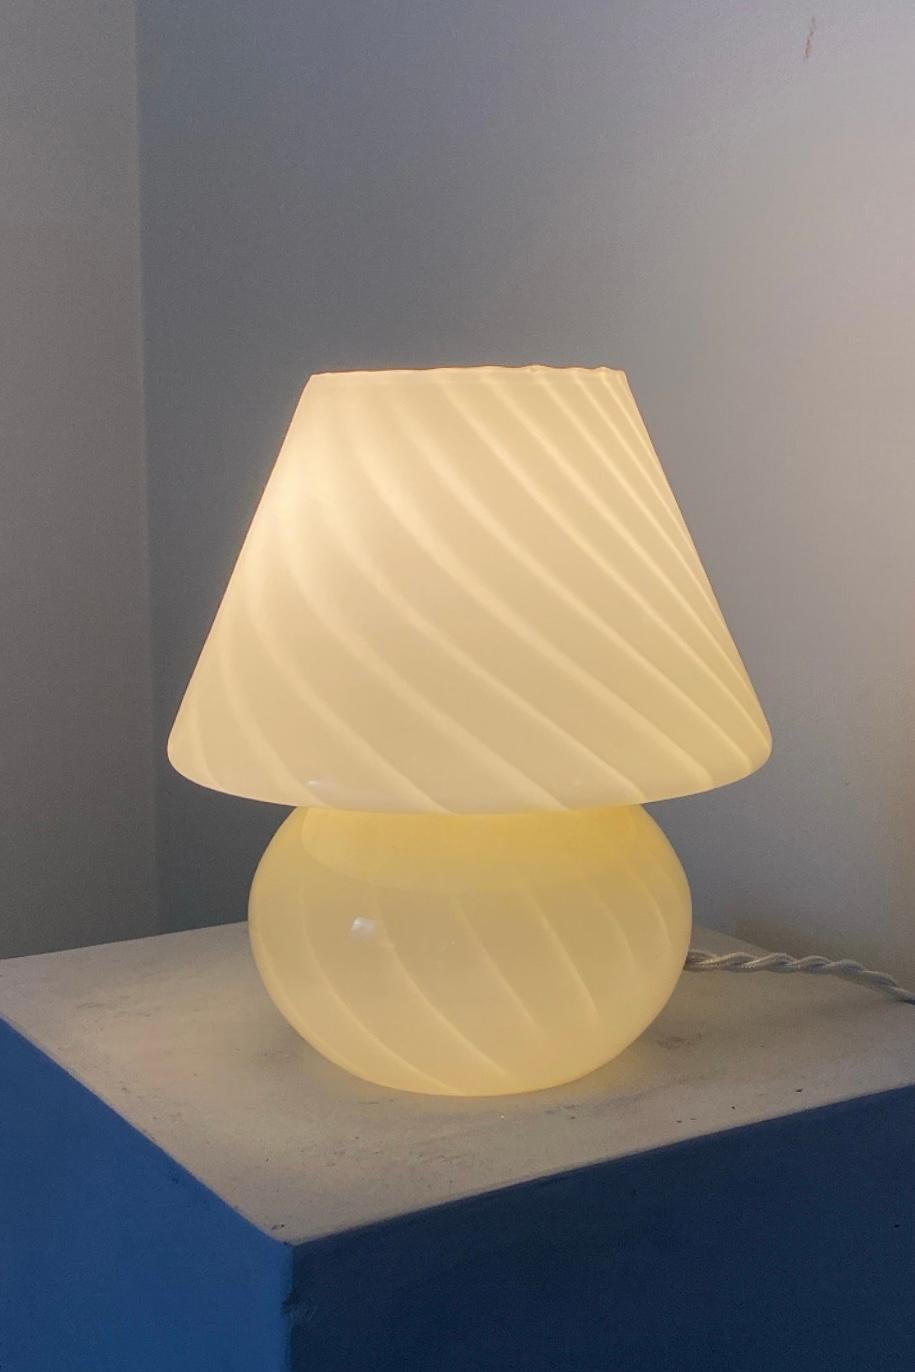 Beautiful vintage Murano baby mushroom table lamp. Mouth blown in creamy yellow glass with swirl. The perfect size for a bedside table. Handmade in Italy, 1970s, and comes with twisted fabric cord. Measures: H: 20 cm, D: 16 cm.
 